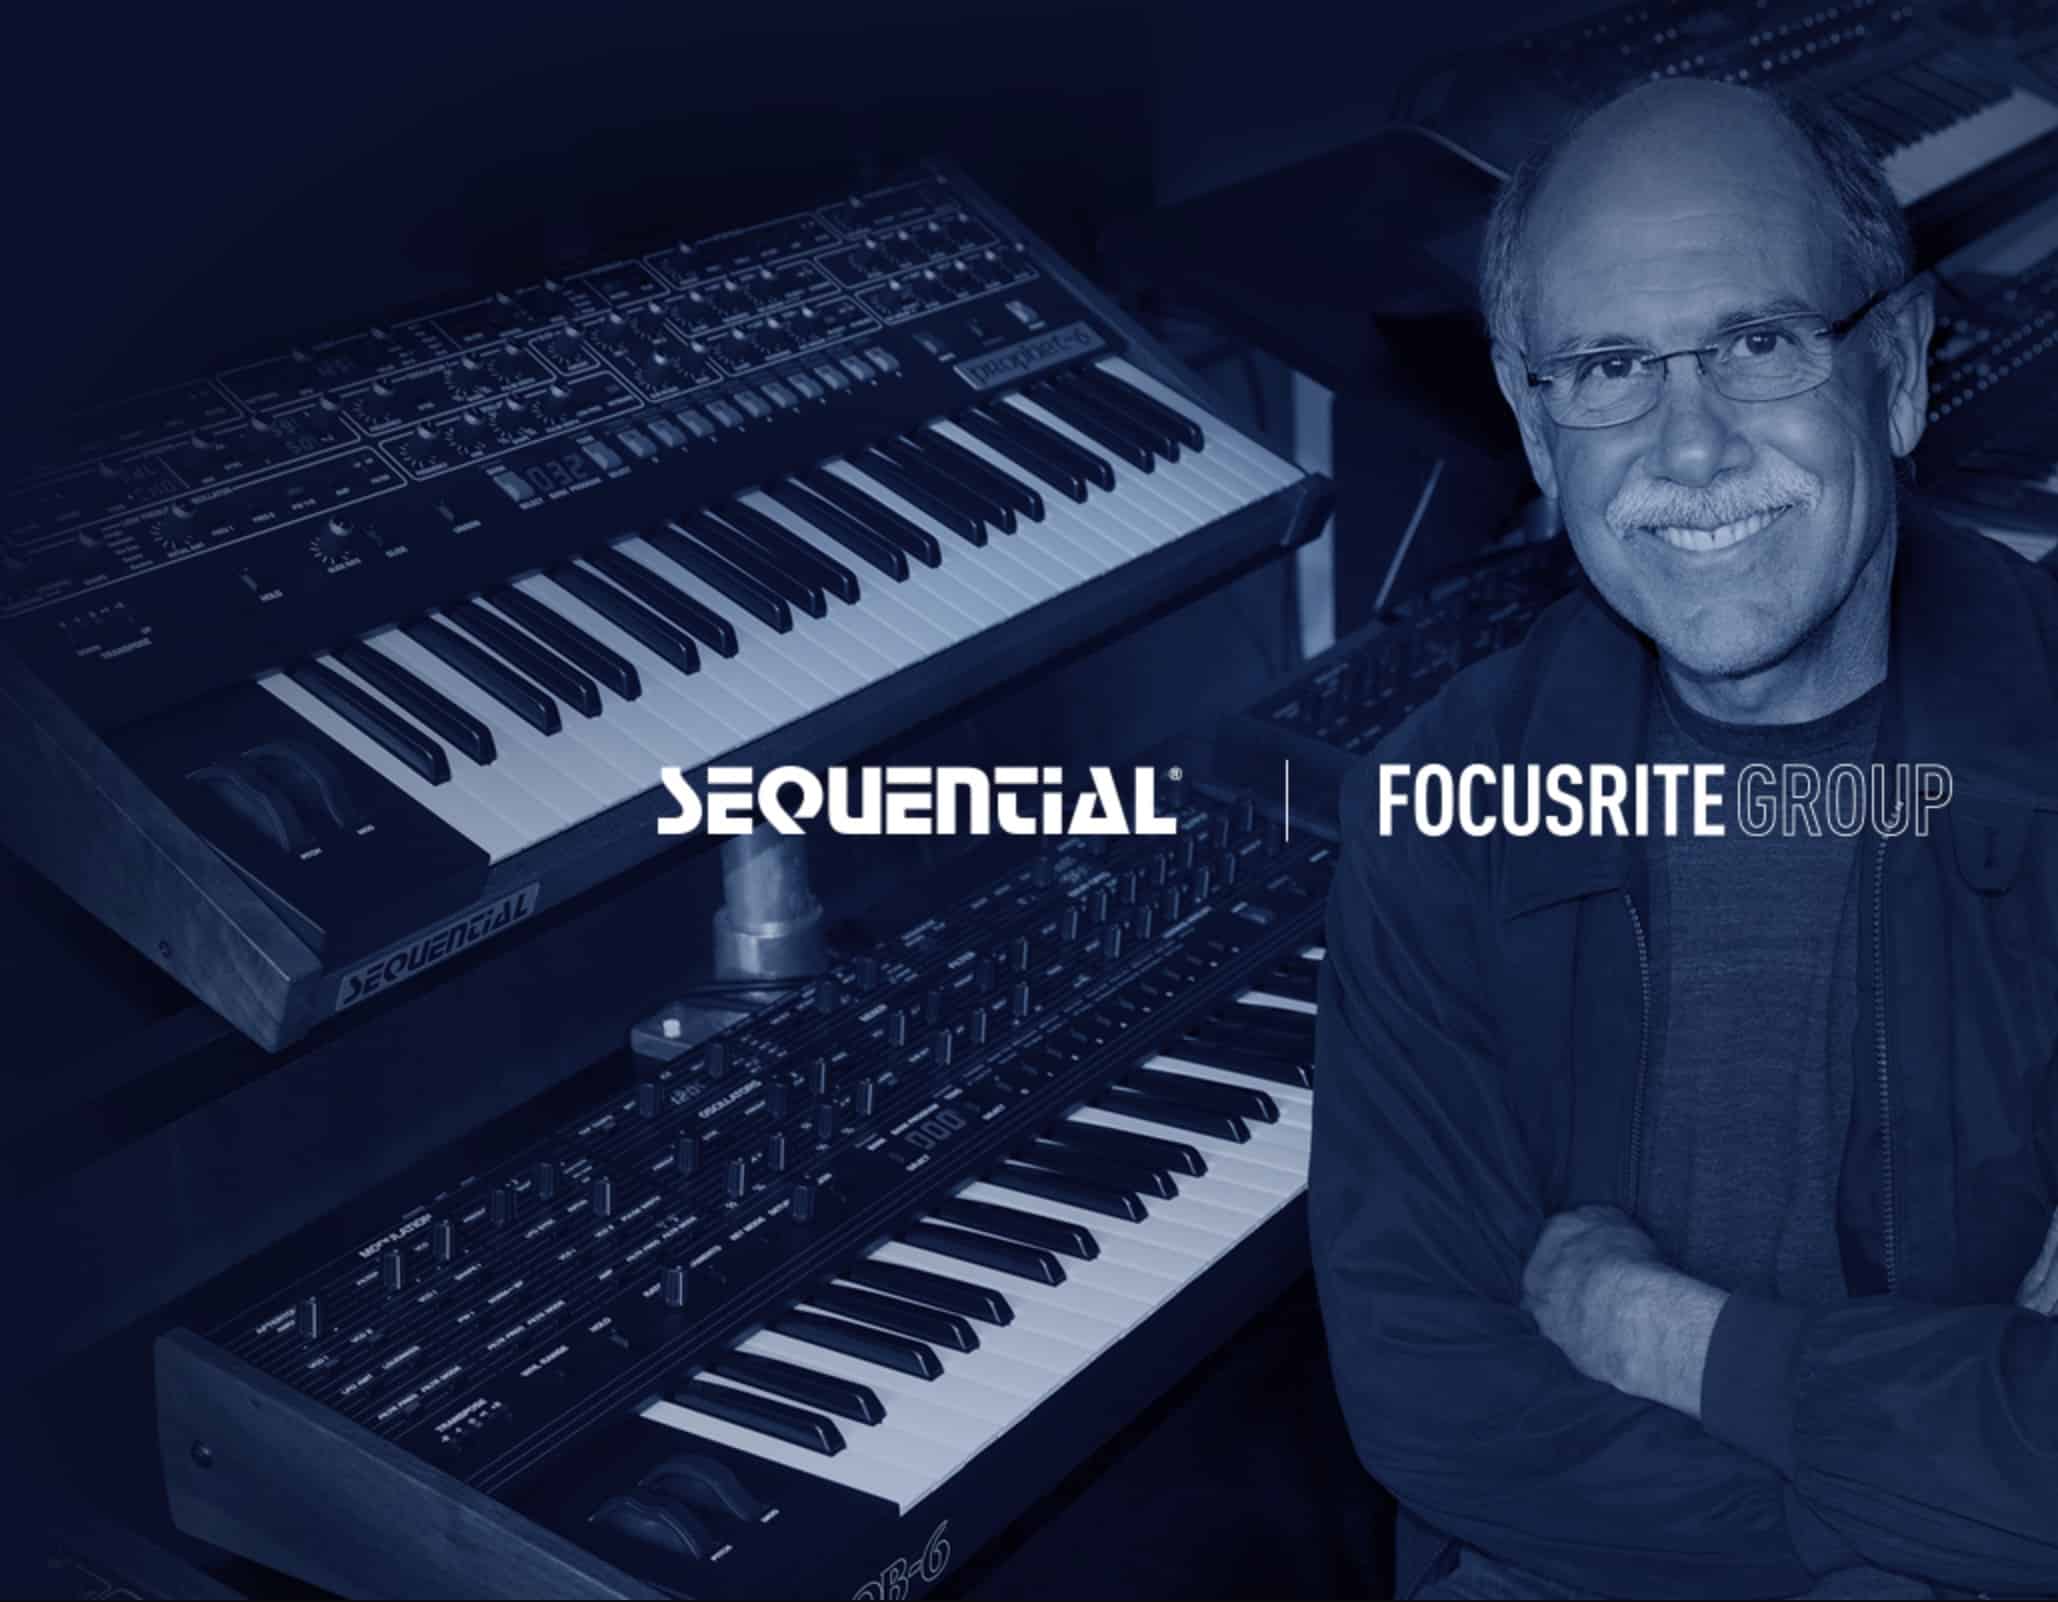 Focusrite Group Acquires Legendary Synth Brand